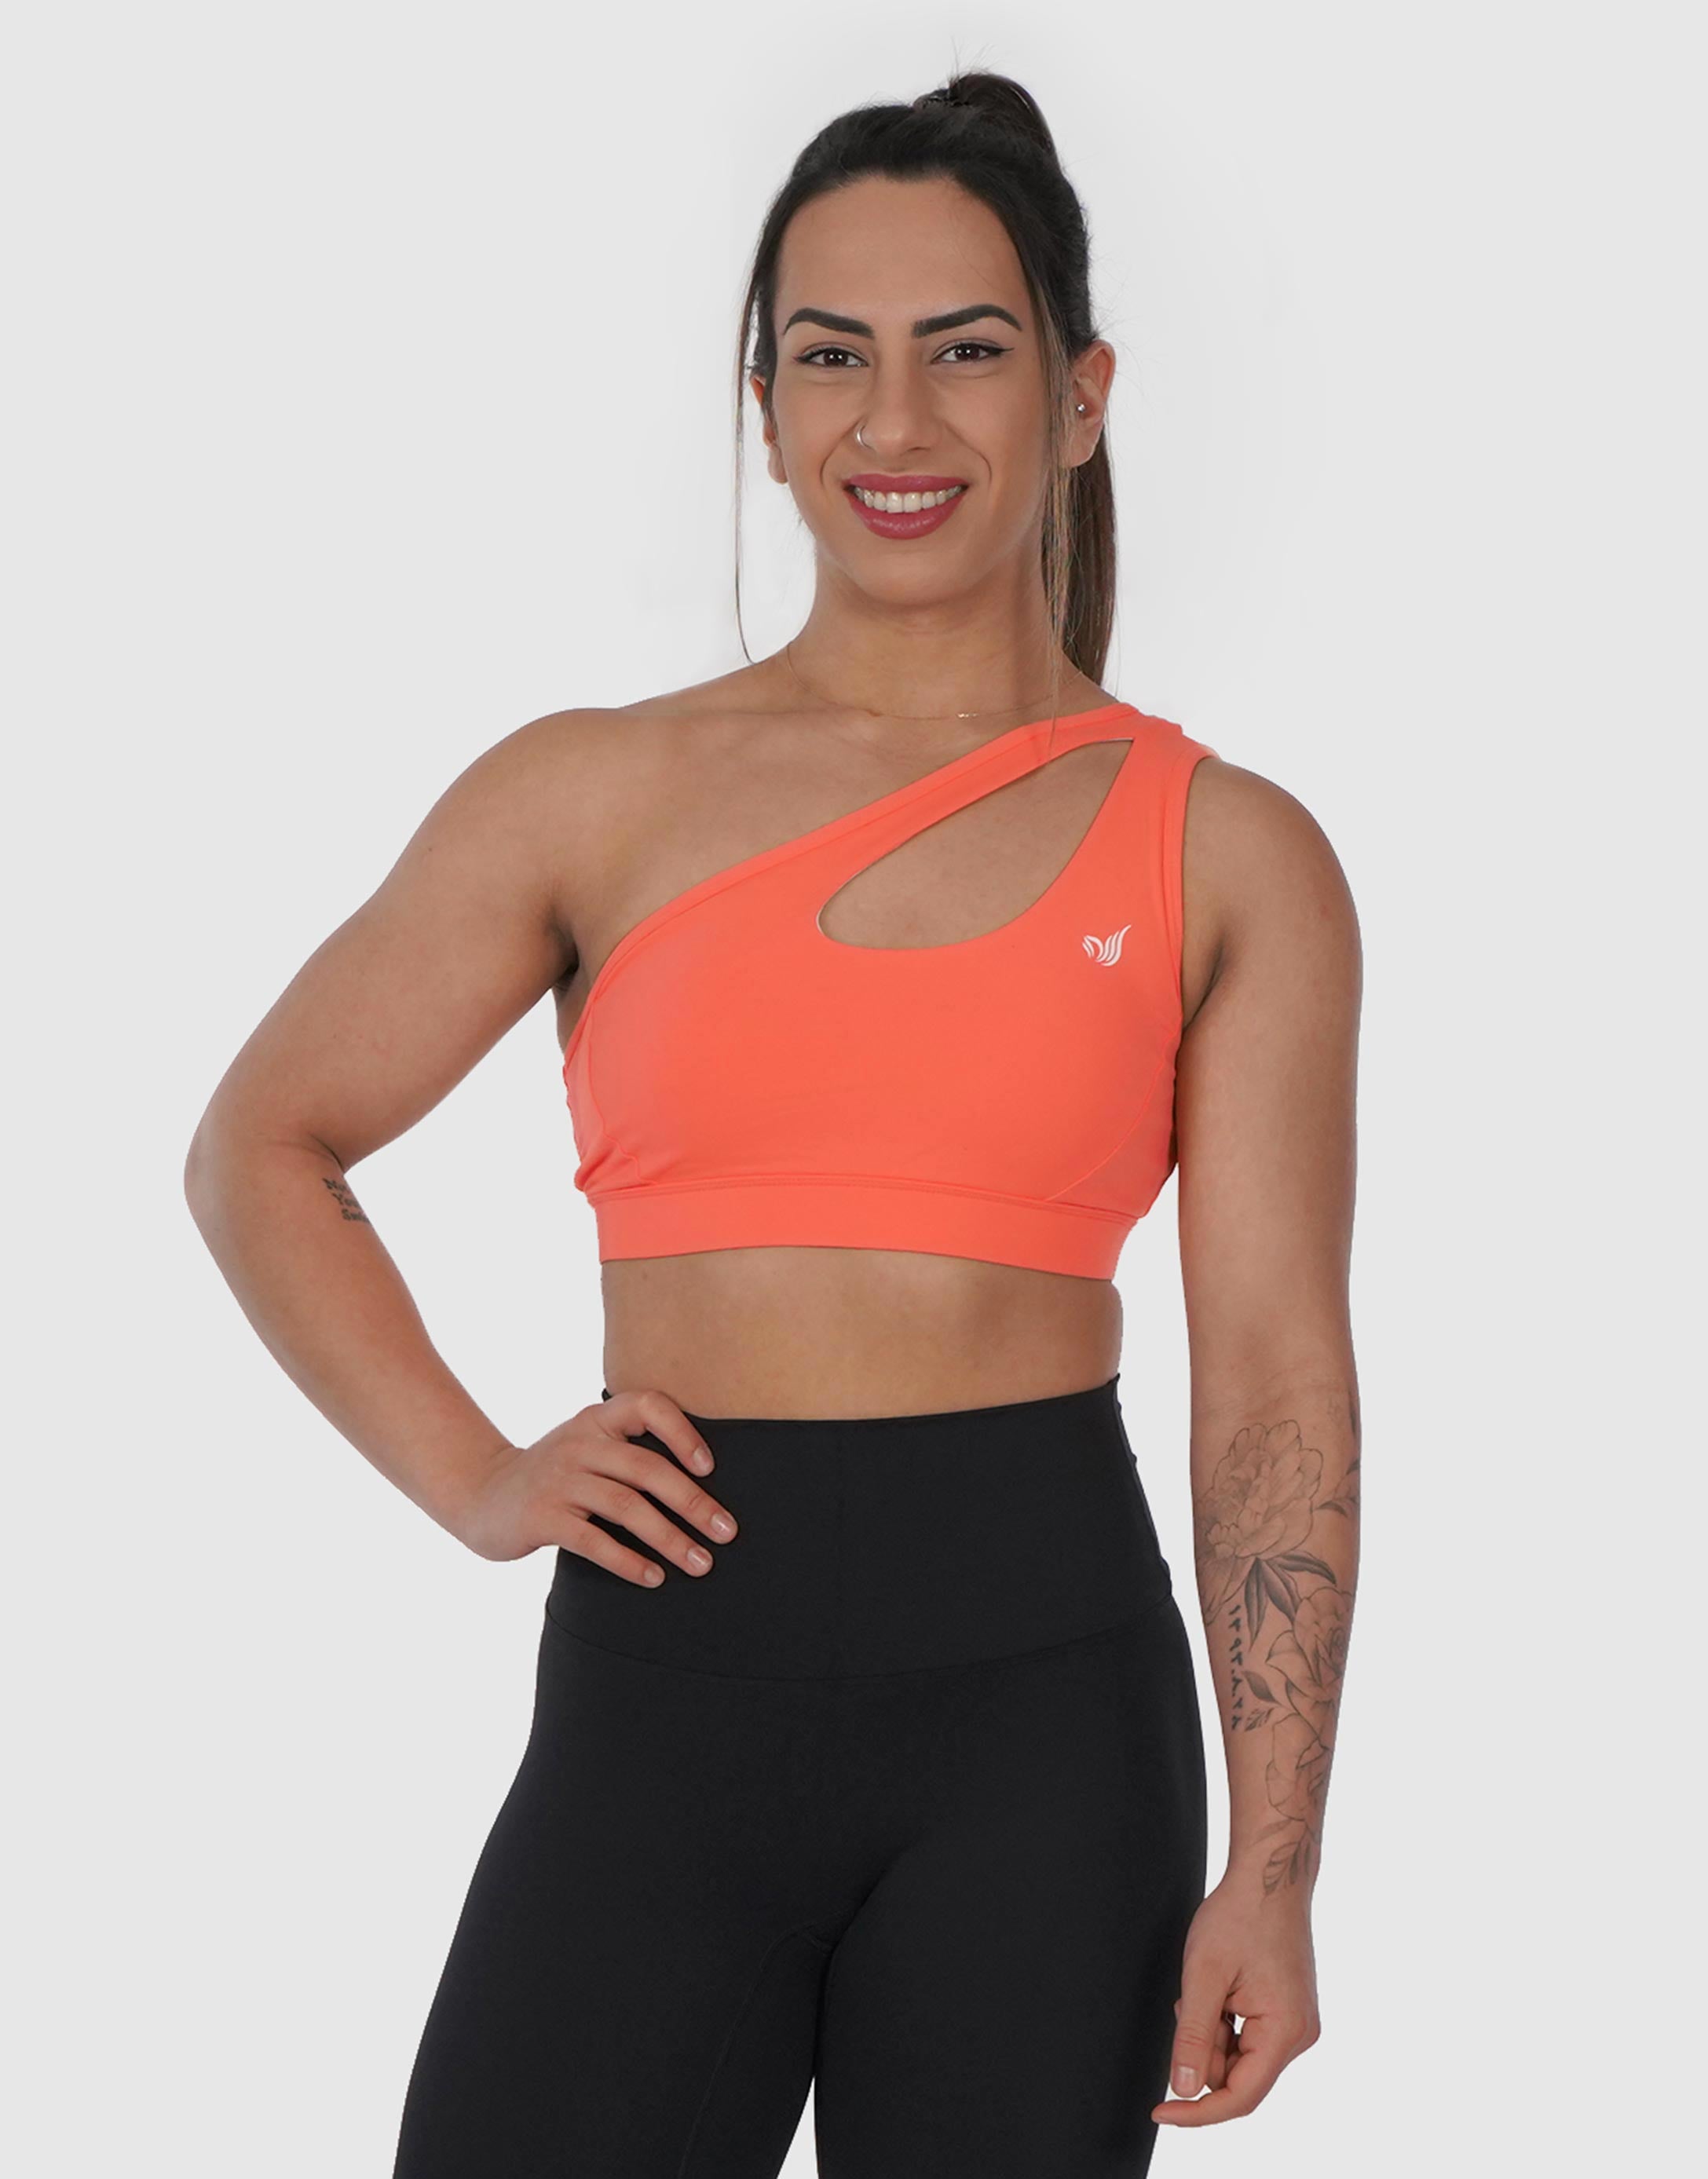 Baberdicy Crop Tops for Women Trendy Women's Sports Underwear One Shoulder  Vacuous Vest Gathered Shockproof Running Sports Beautiful Back Bra Yoga